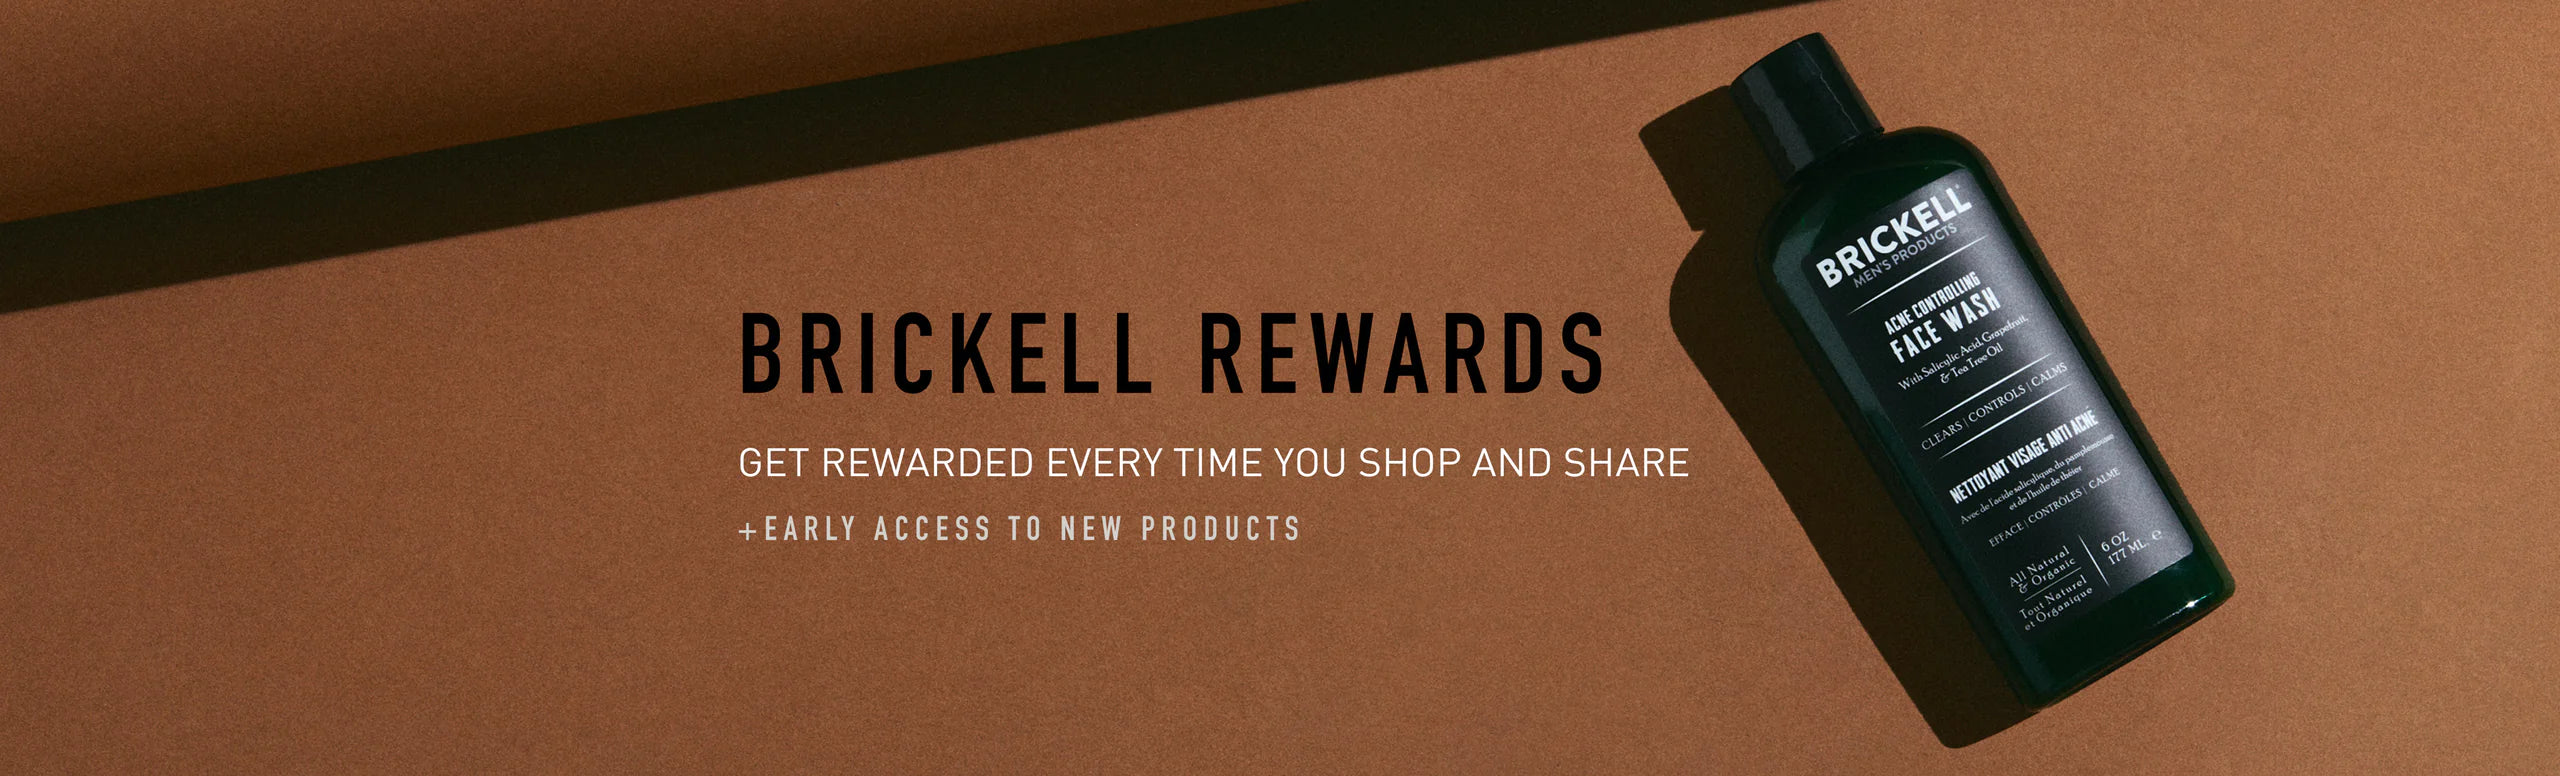 Brickell Rewards Program - Earn points every time you shop and share +get early access to new products.